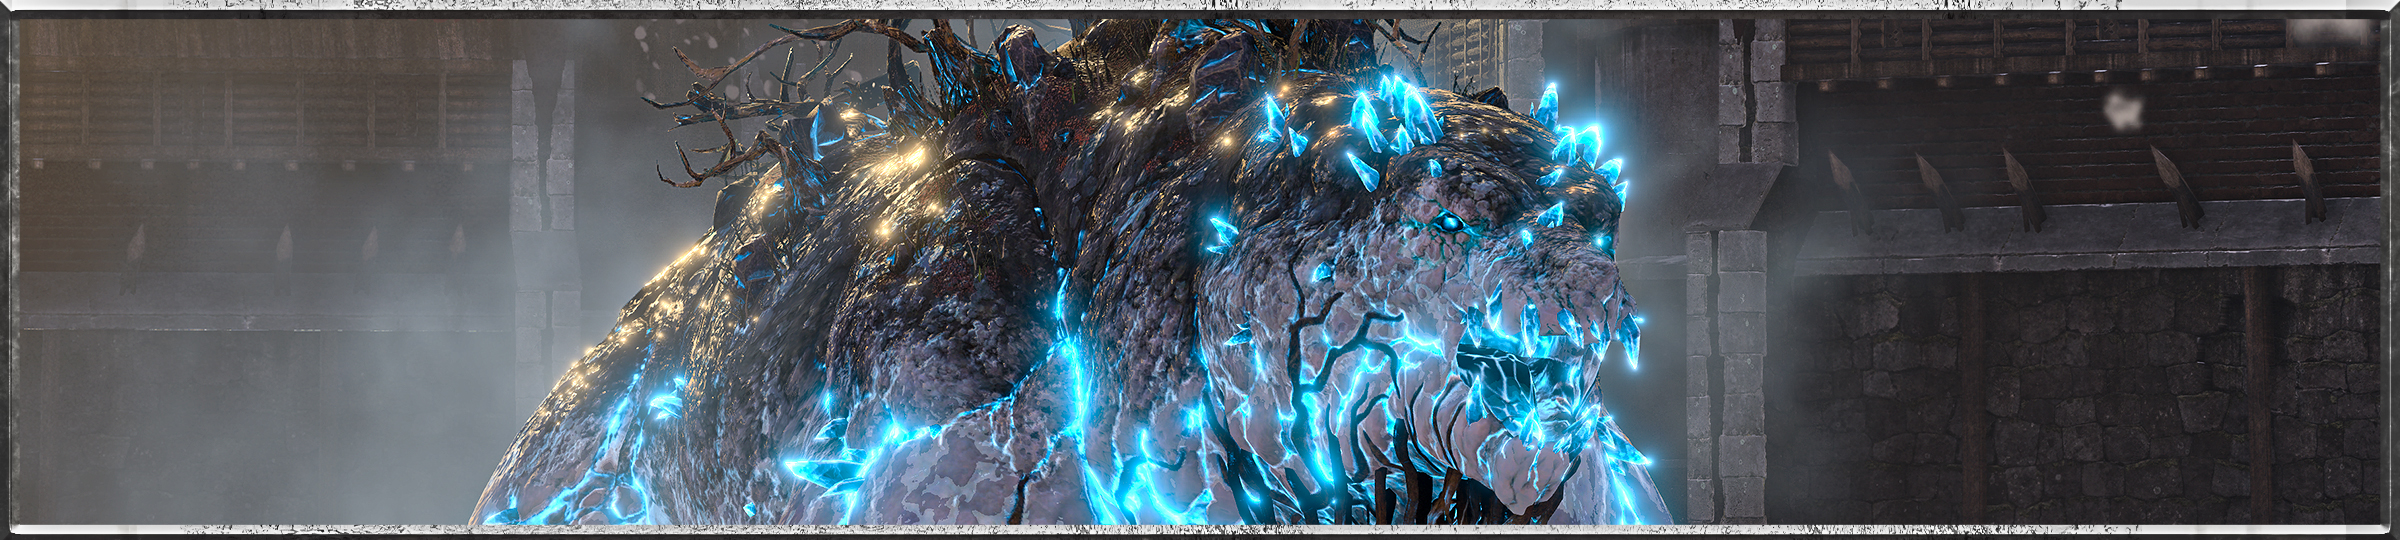 A crackling blue light seeps through gaps in the skin of the Elemental Bear, whose huge frame supports an armour made of dead trees. The bear appears to be standing in some sort of walled metal basement or container.